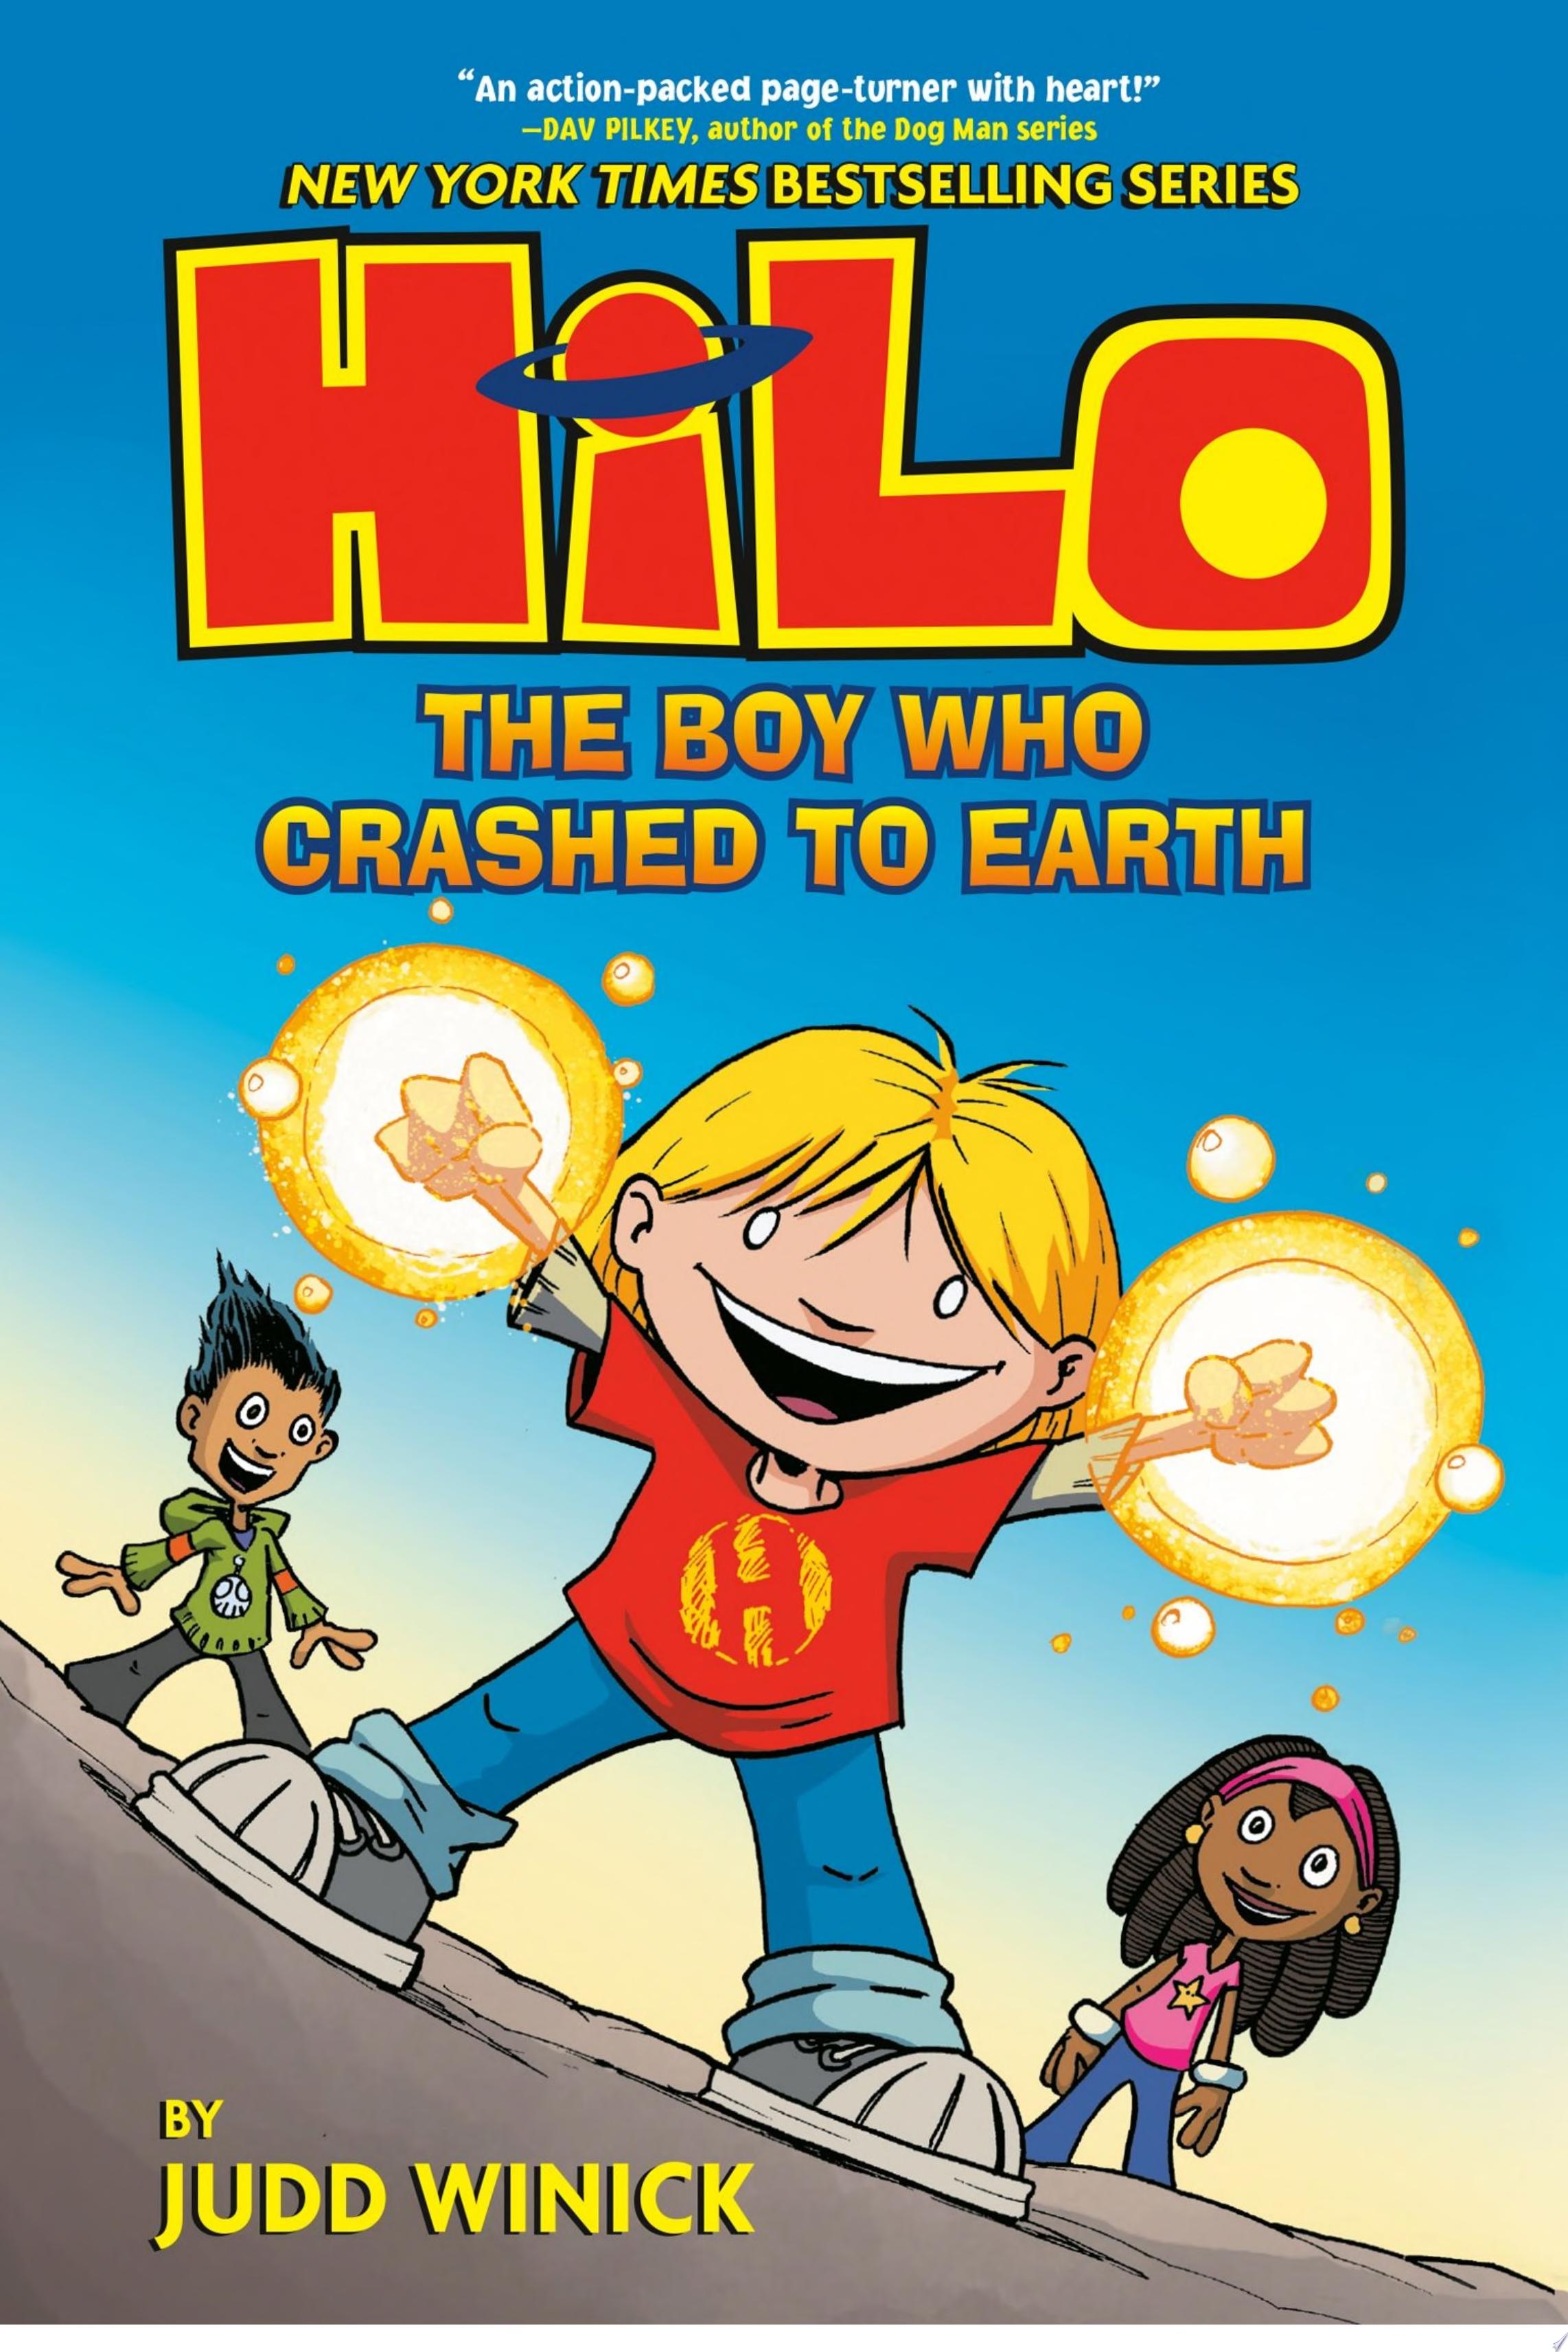 Image for "Hilo Book 1: The Boy Who Crashed to Earth"